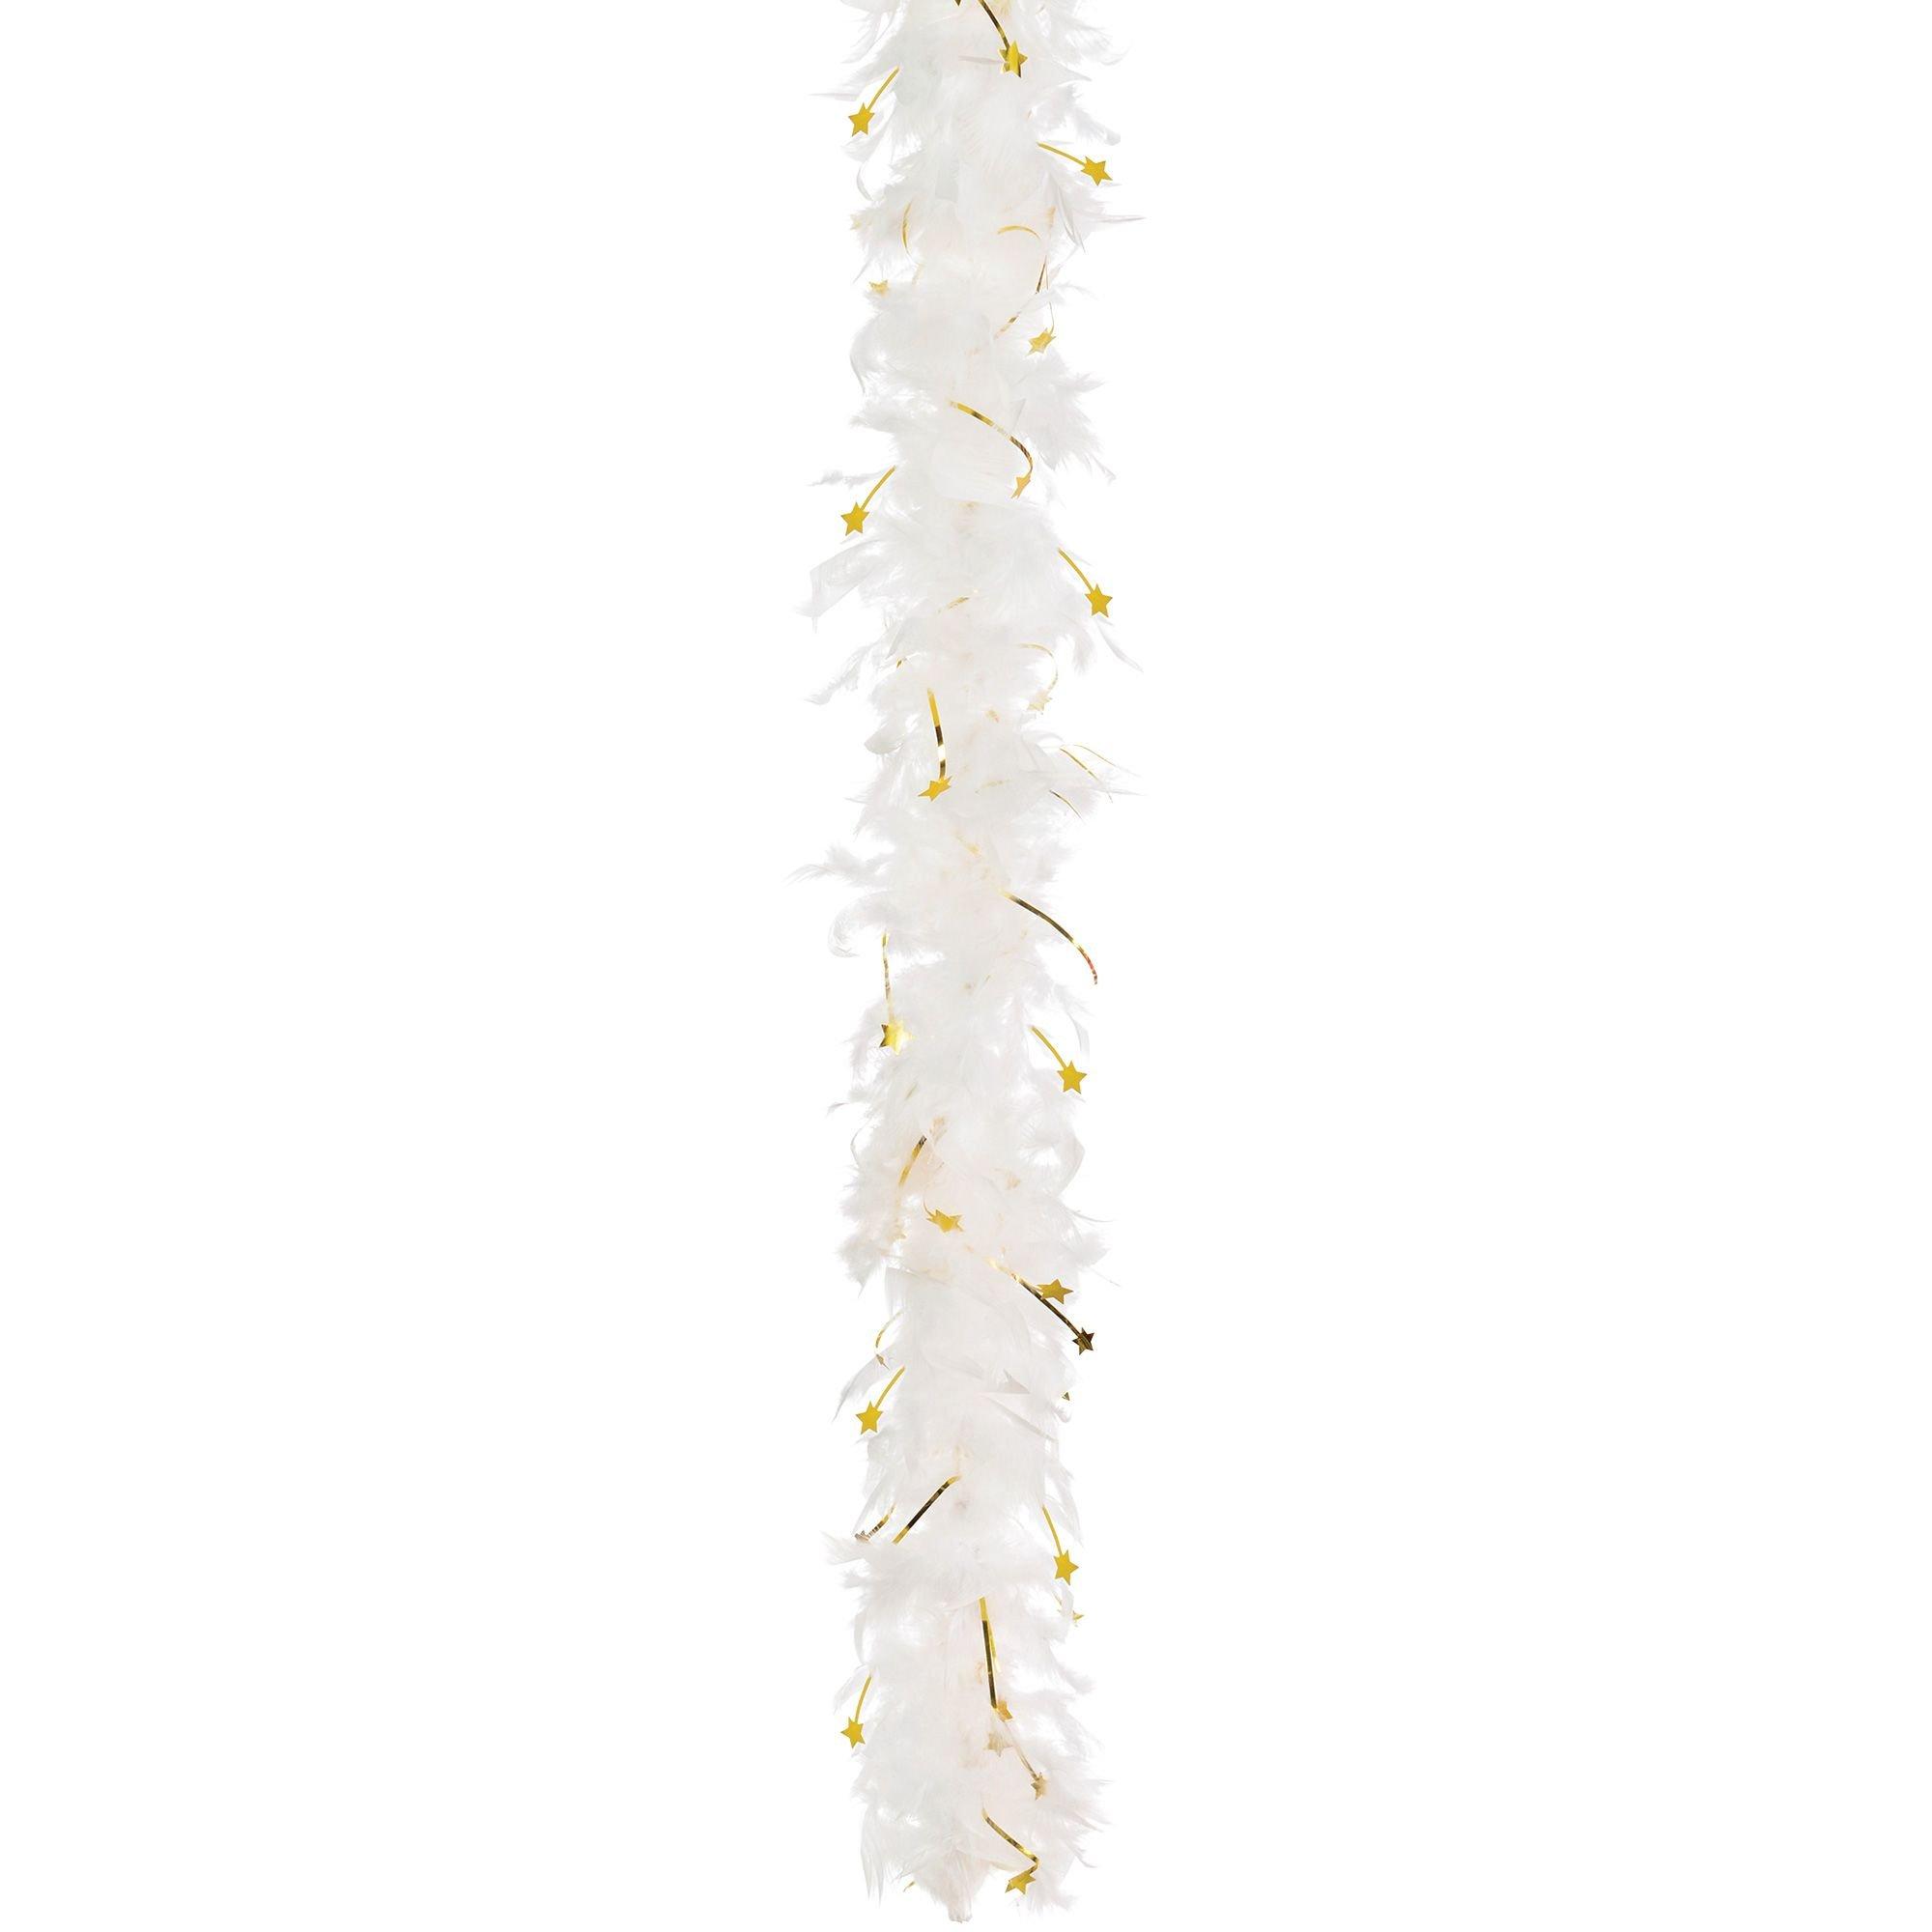 HAYES SPECIALTIES White Feather boa with Silver Tinsel